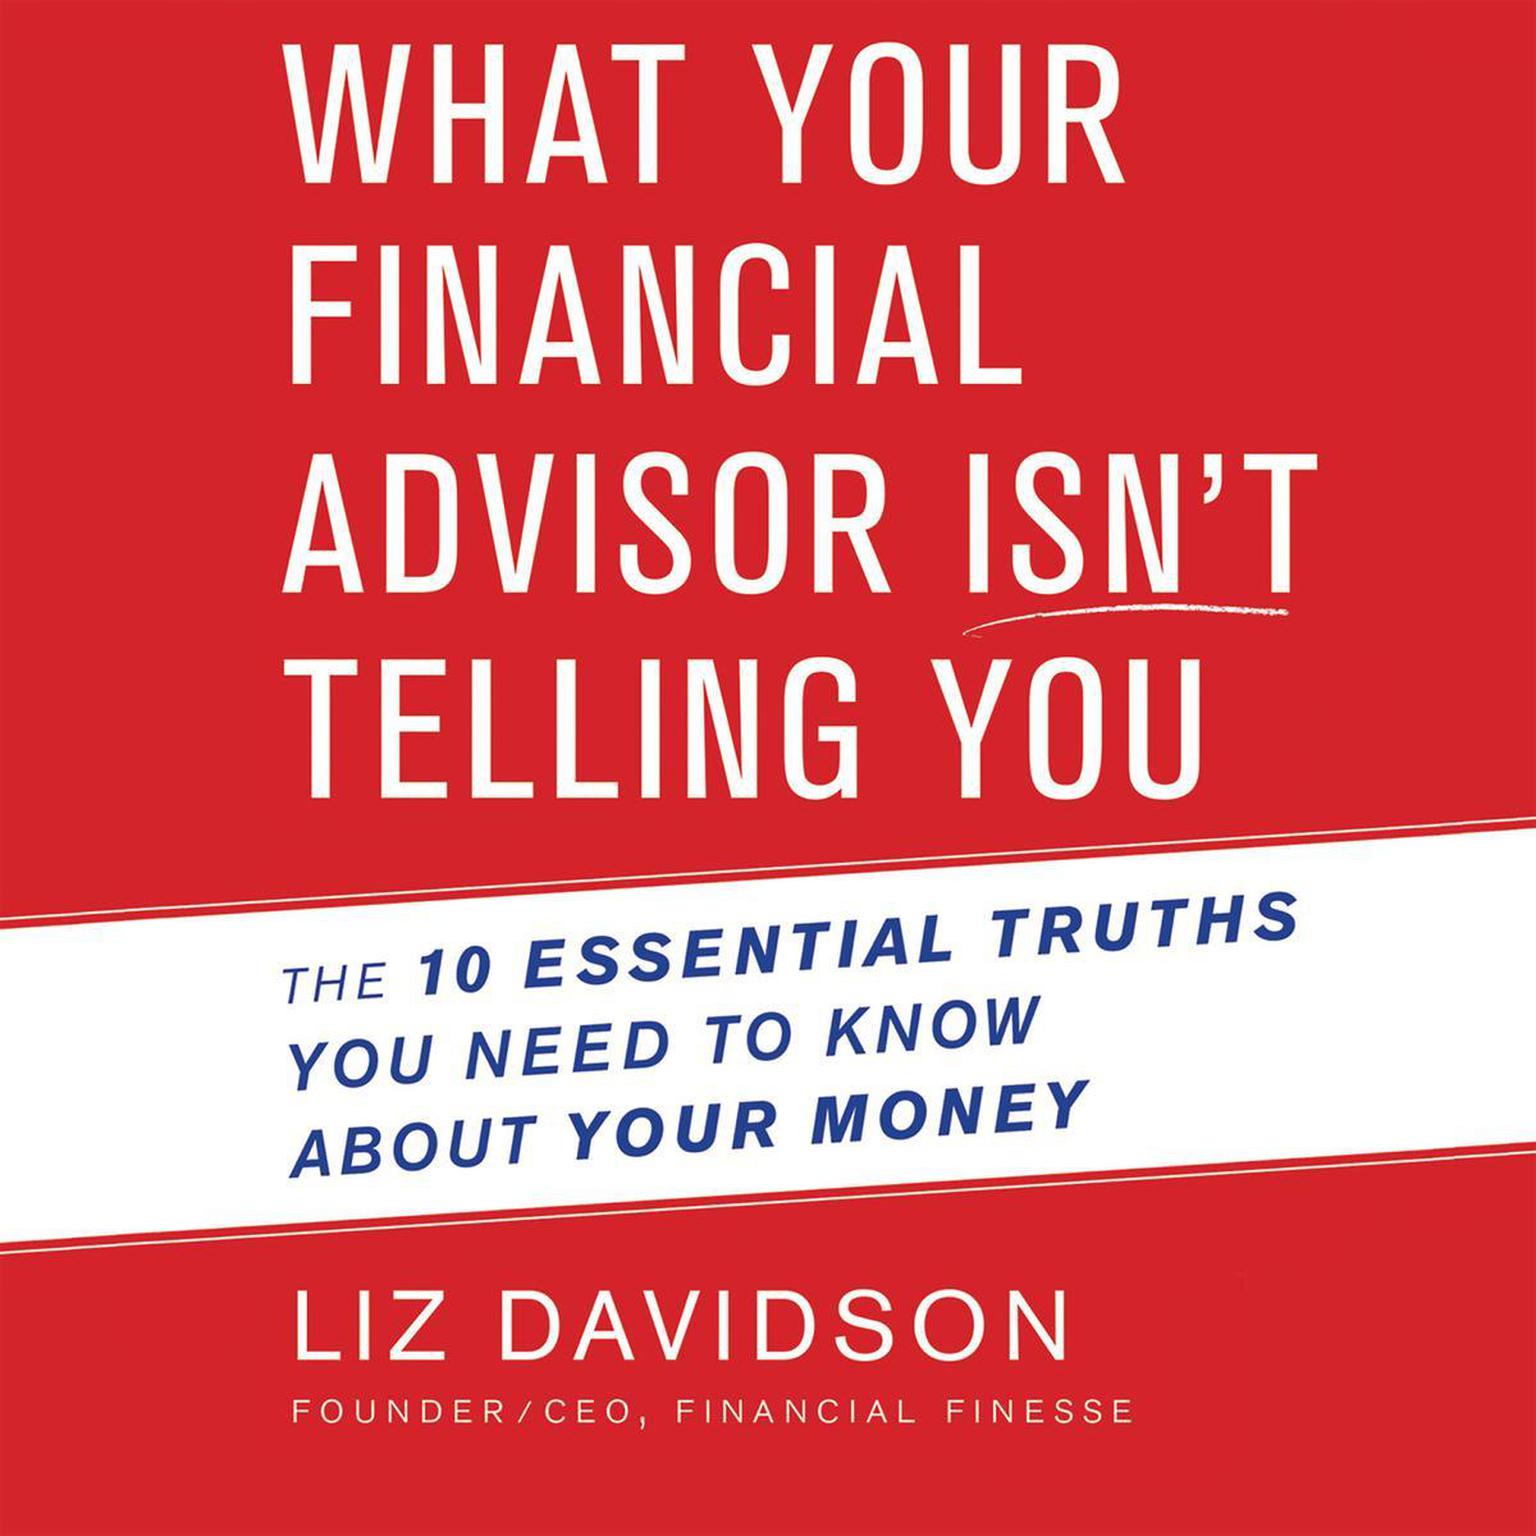 What Your Financial Advisor Isnt Telling You: The 10 Essential Truths You Need to Know About Your Money Audiobook, by Liz Davidson